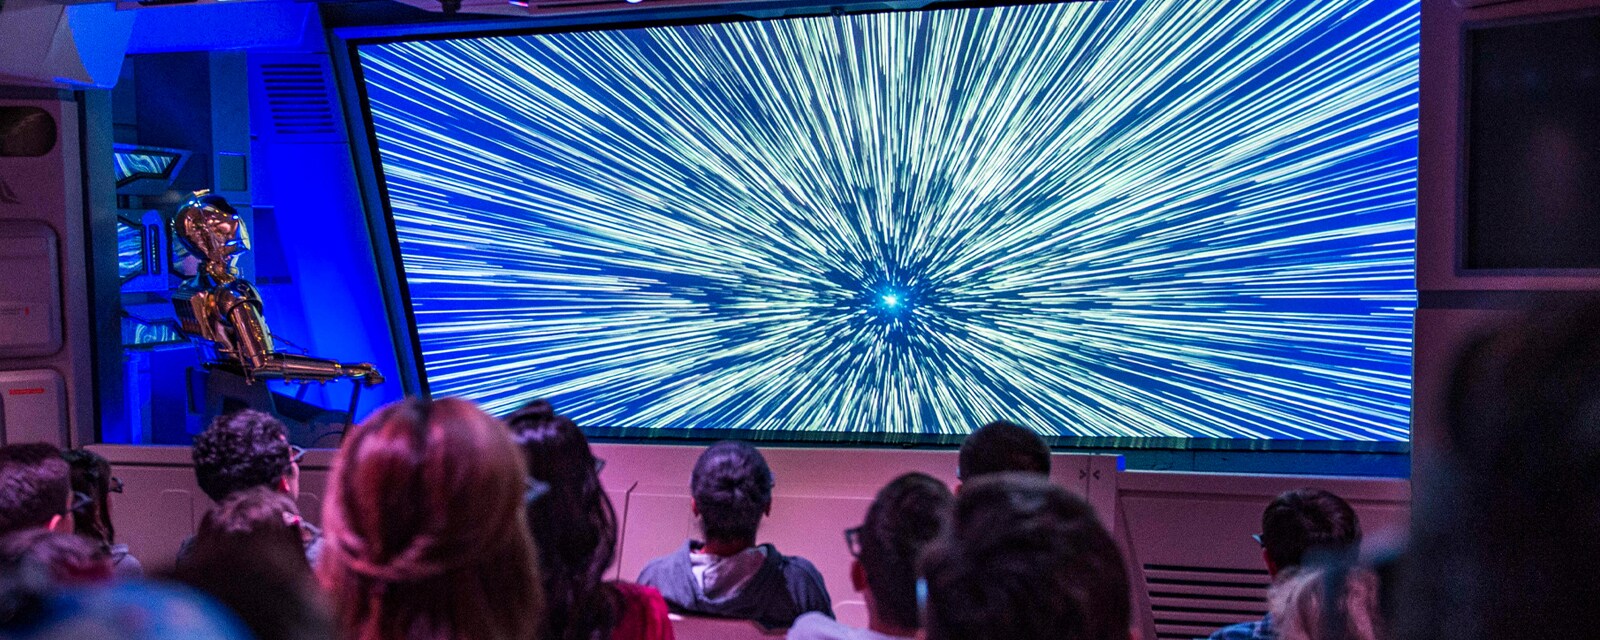 Star Tours going through hyperspace